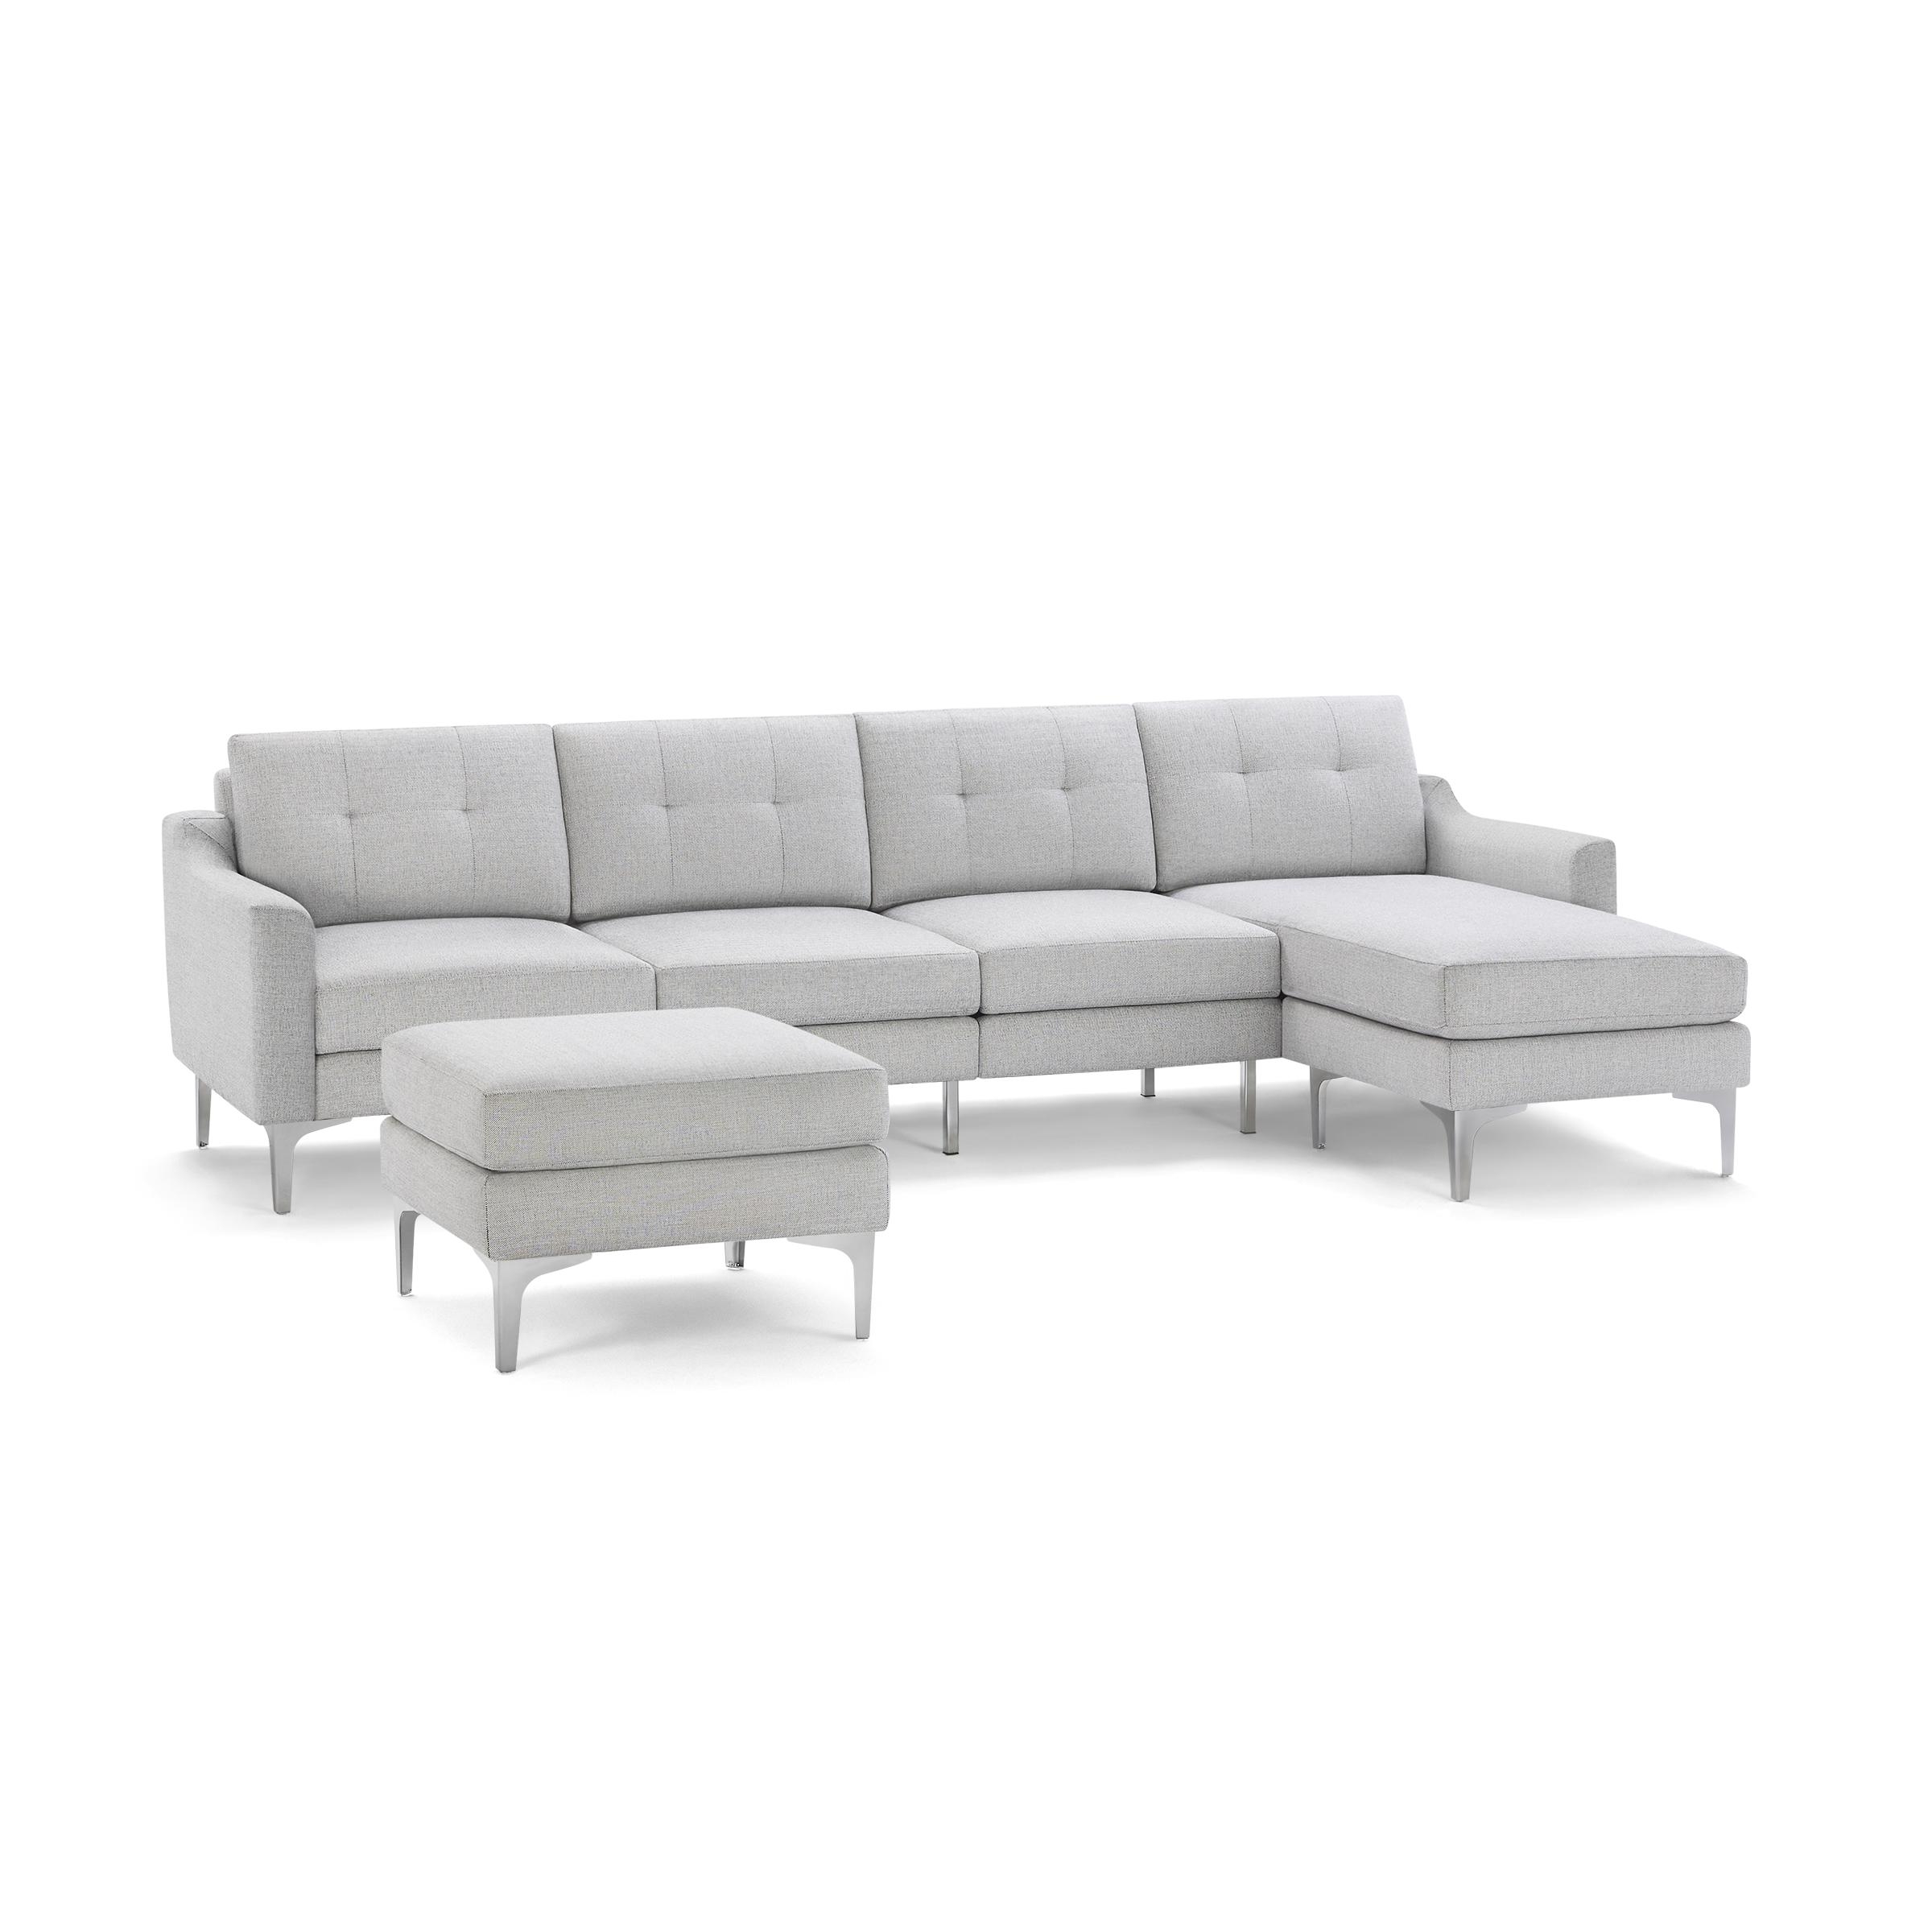 The Slope Nomad King Sectional Sofa and Ottoman in Crushed Gravel - Image 0